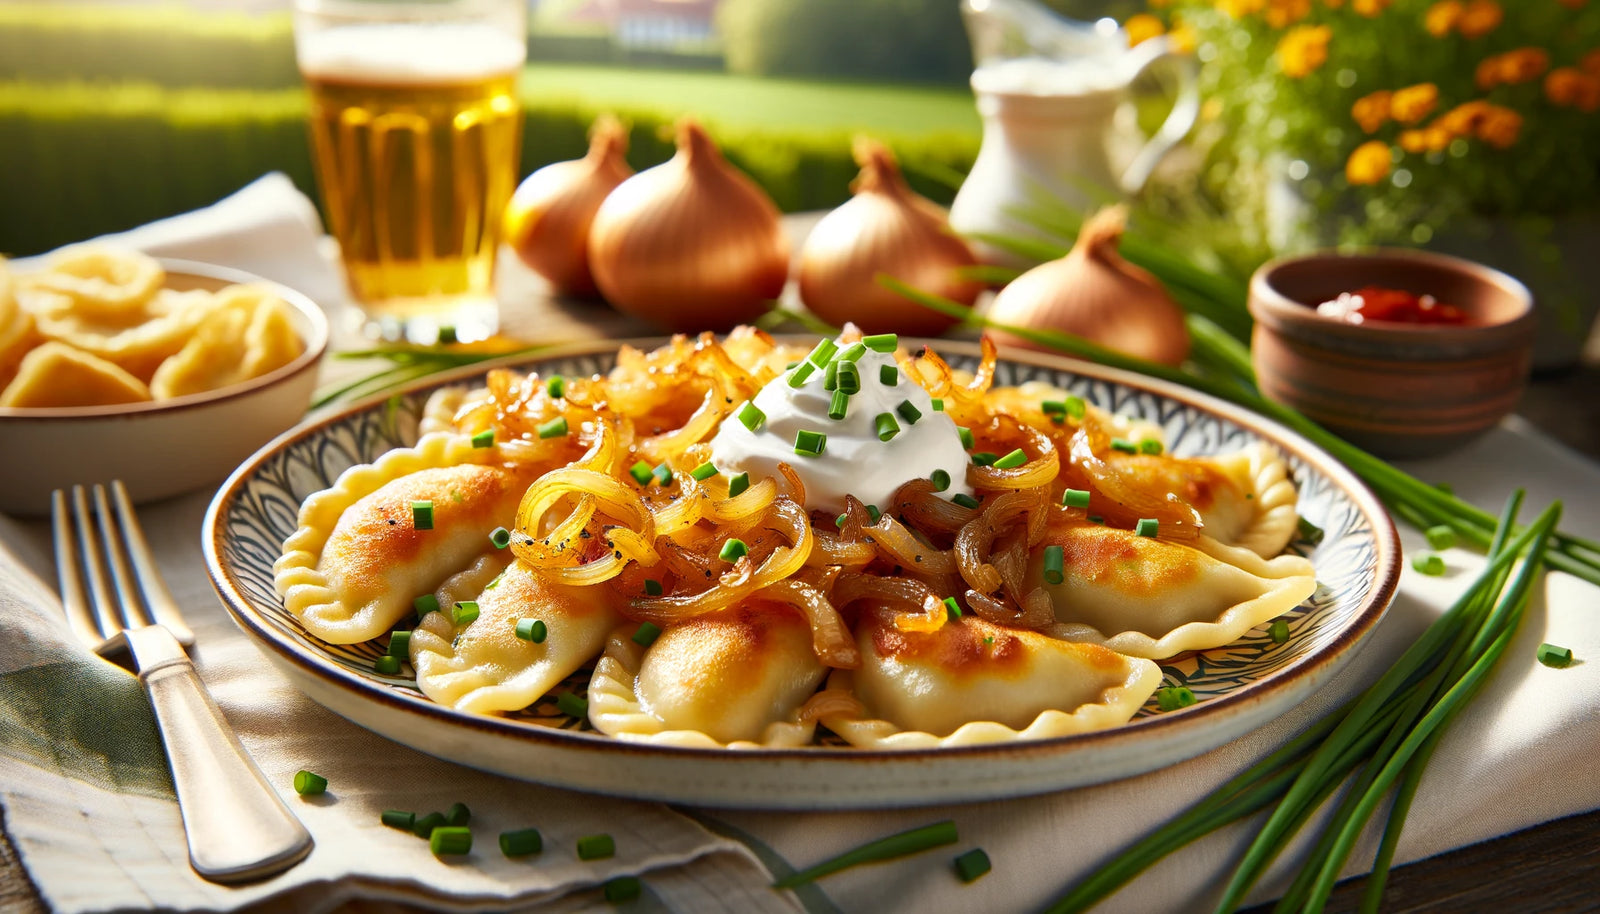 Beautifully Grilled Pierogi with Golden Brown Edges